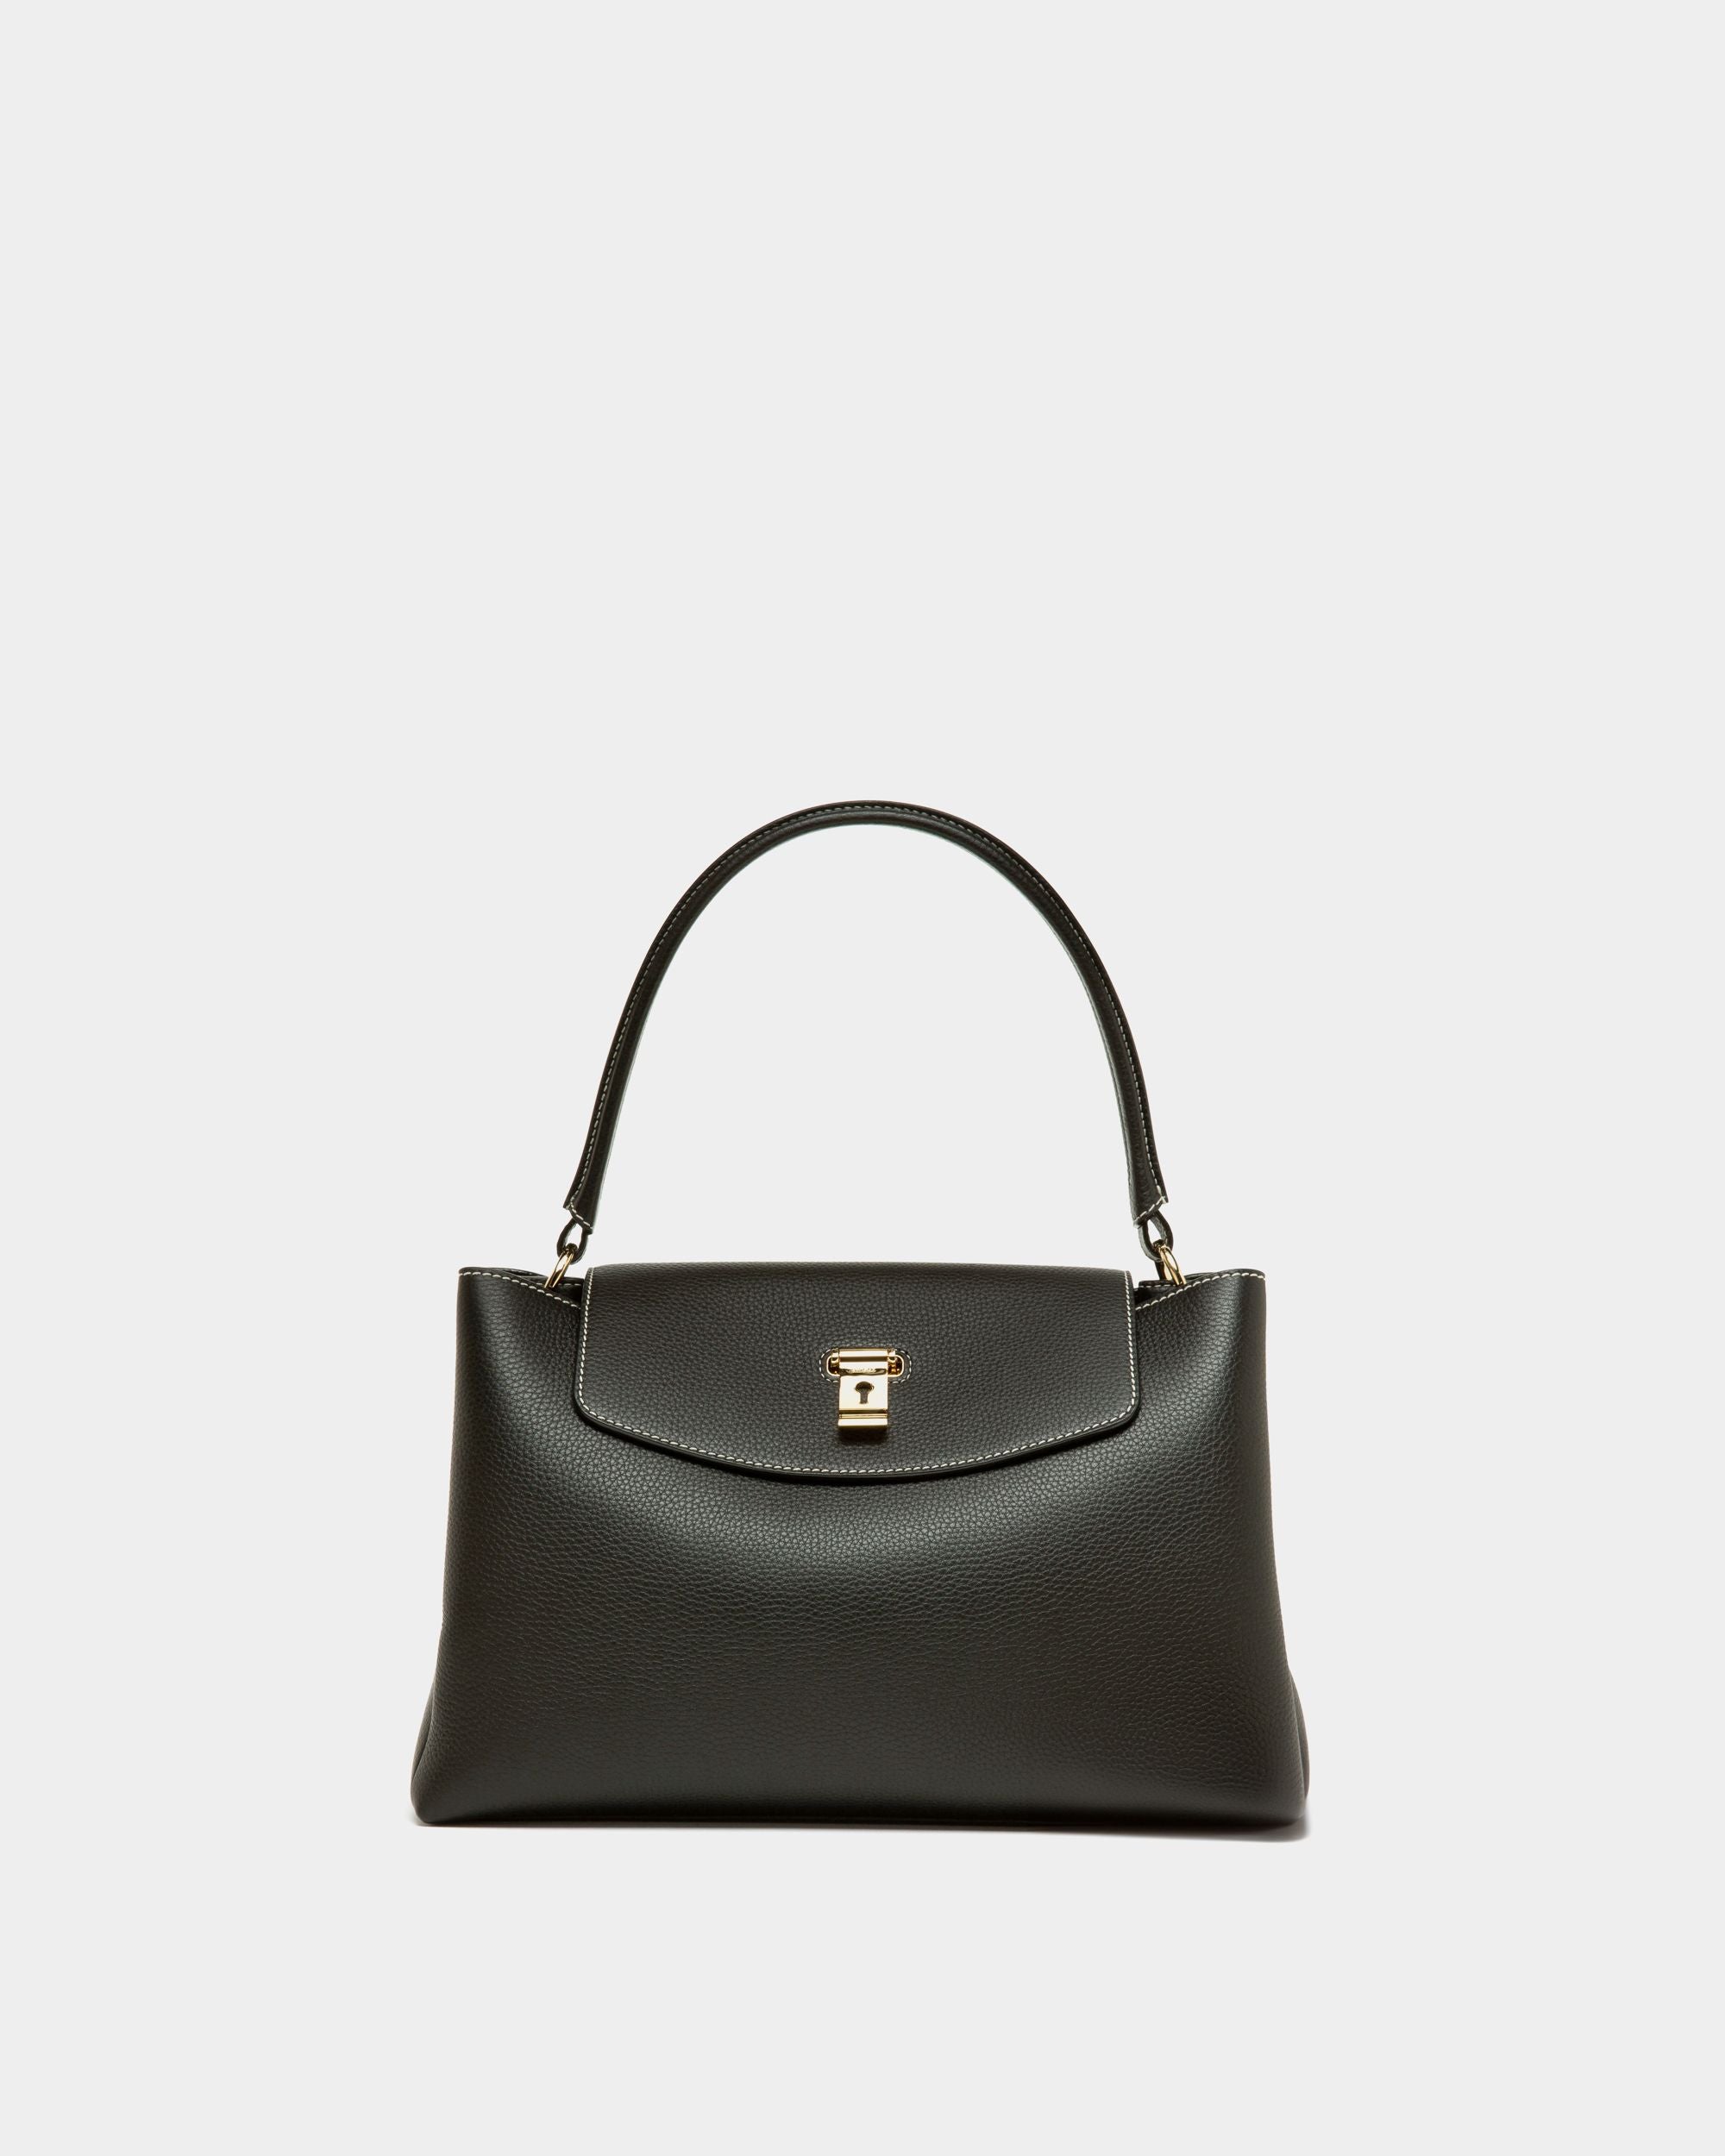 Women's Lock Me Top Handle Bag In Black Leather | Bally | Still Life Front